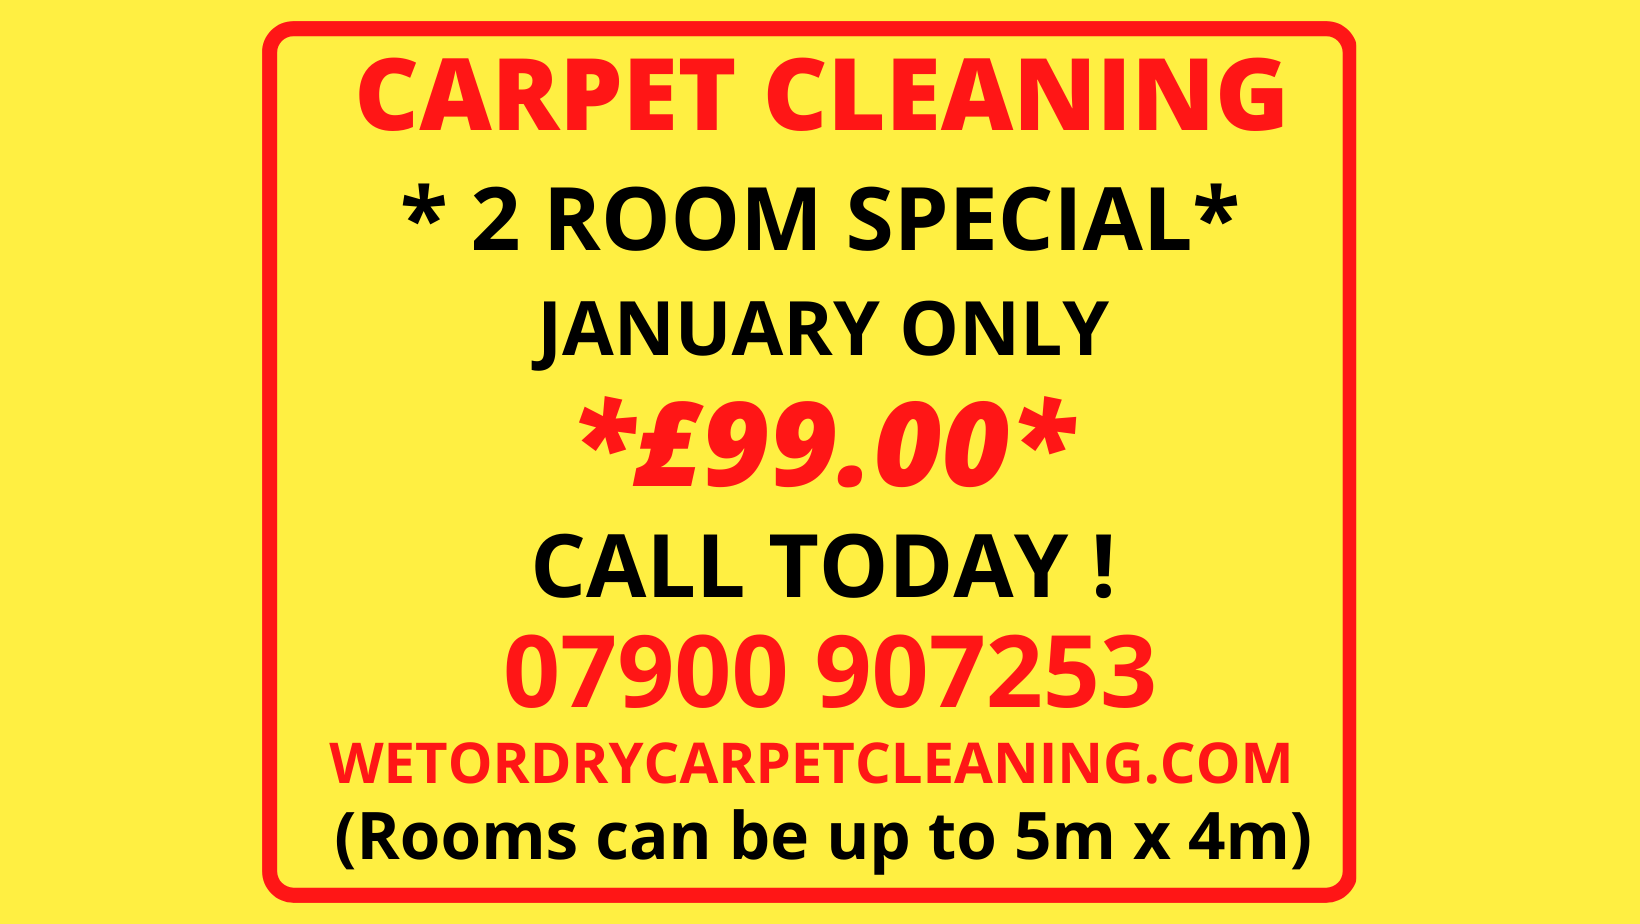 2 Room January Special - 2 Rooms Cleaned for £99.00 !